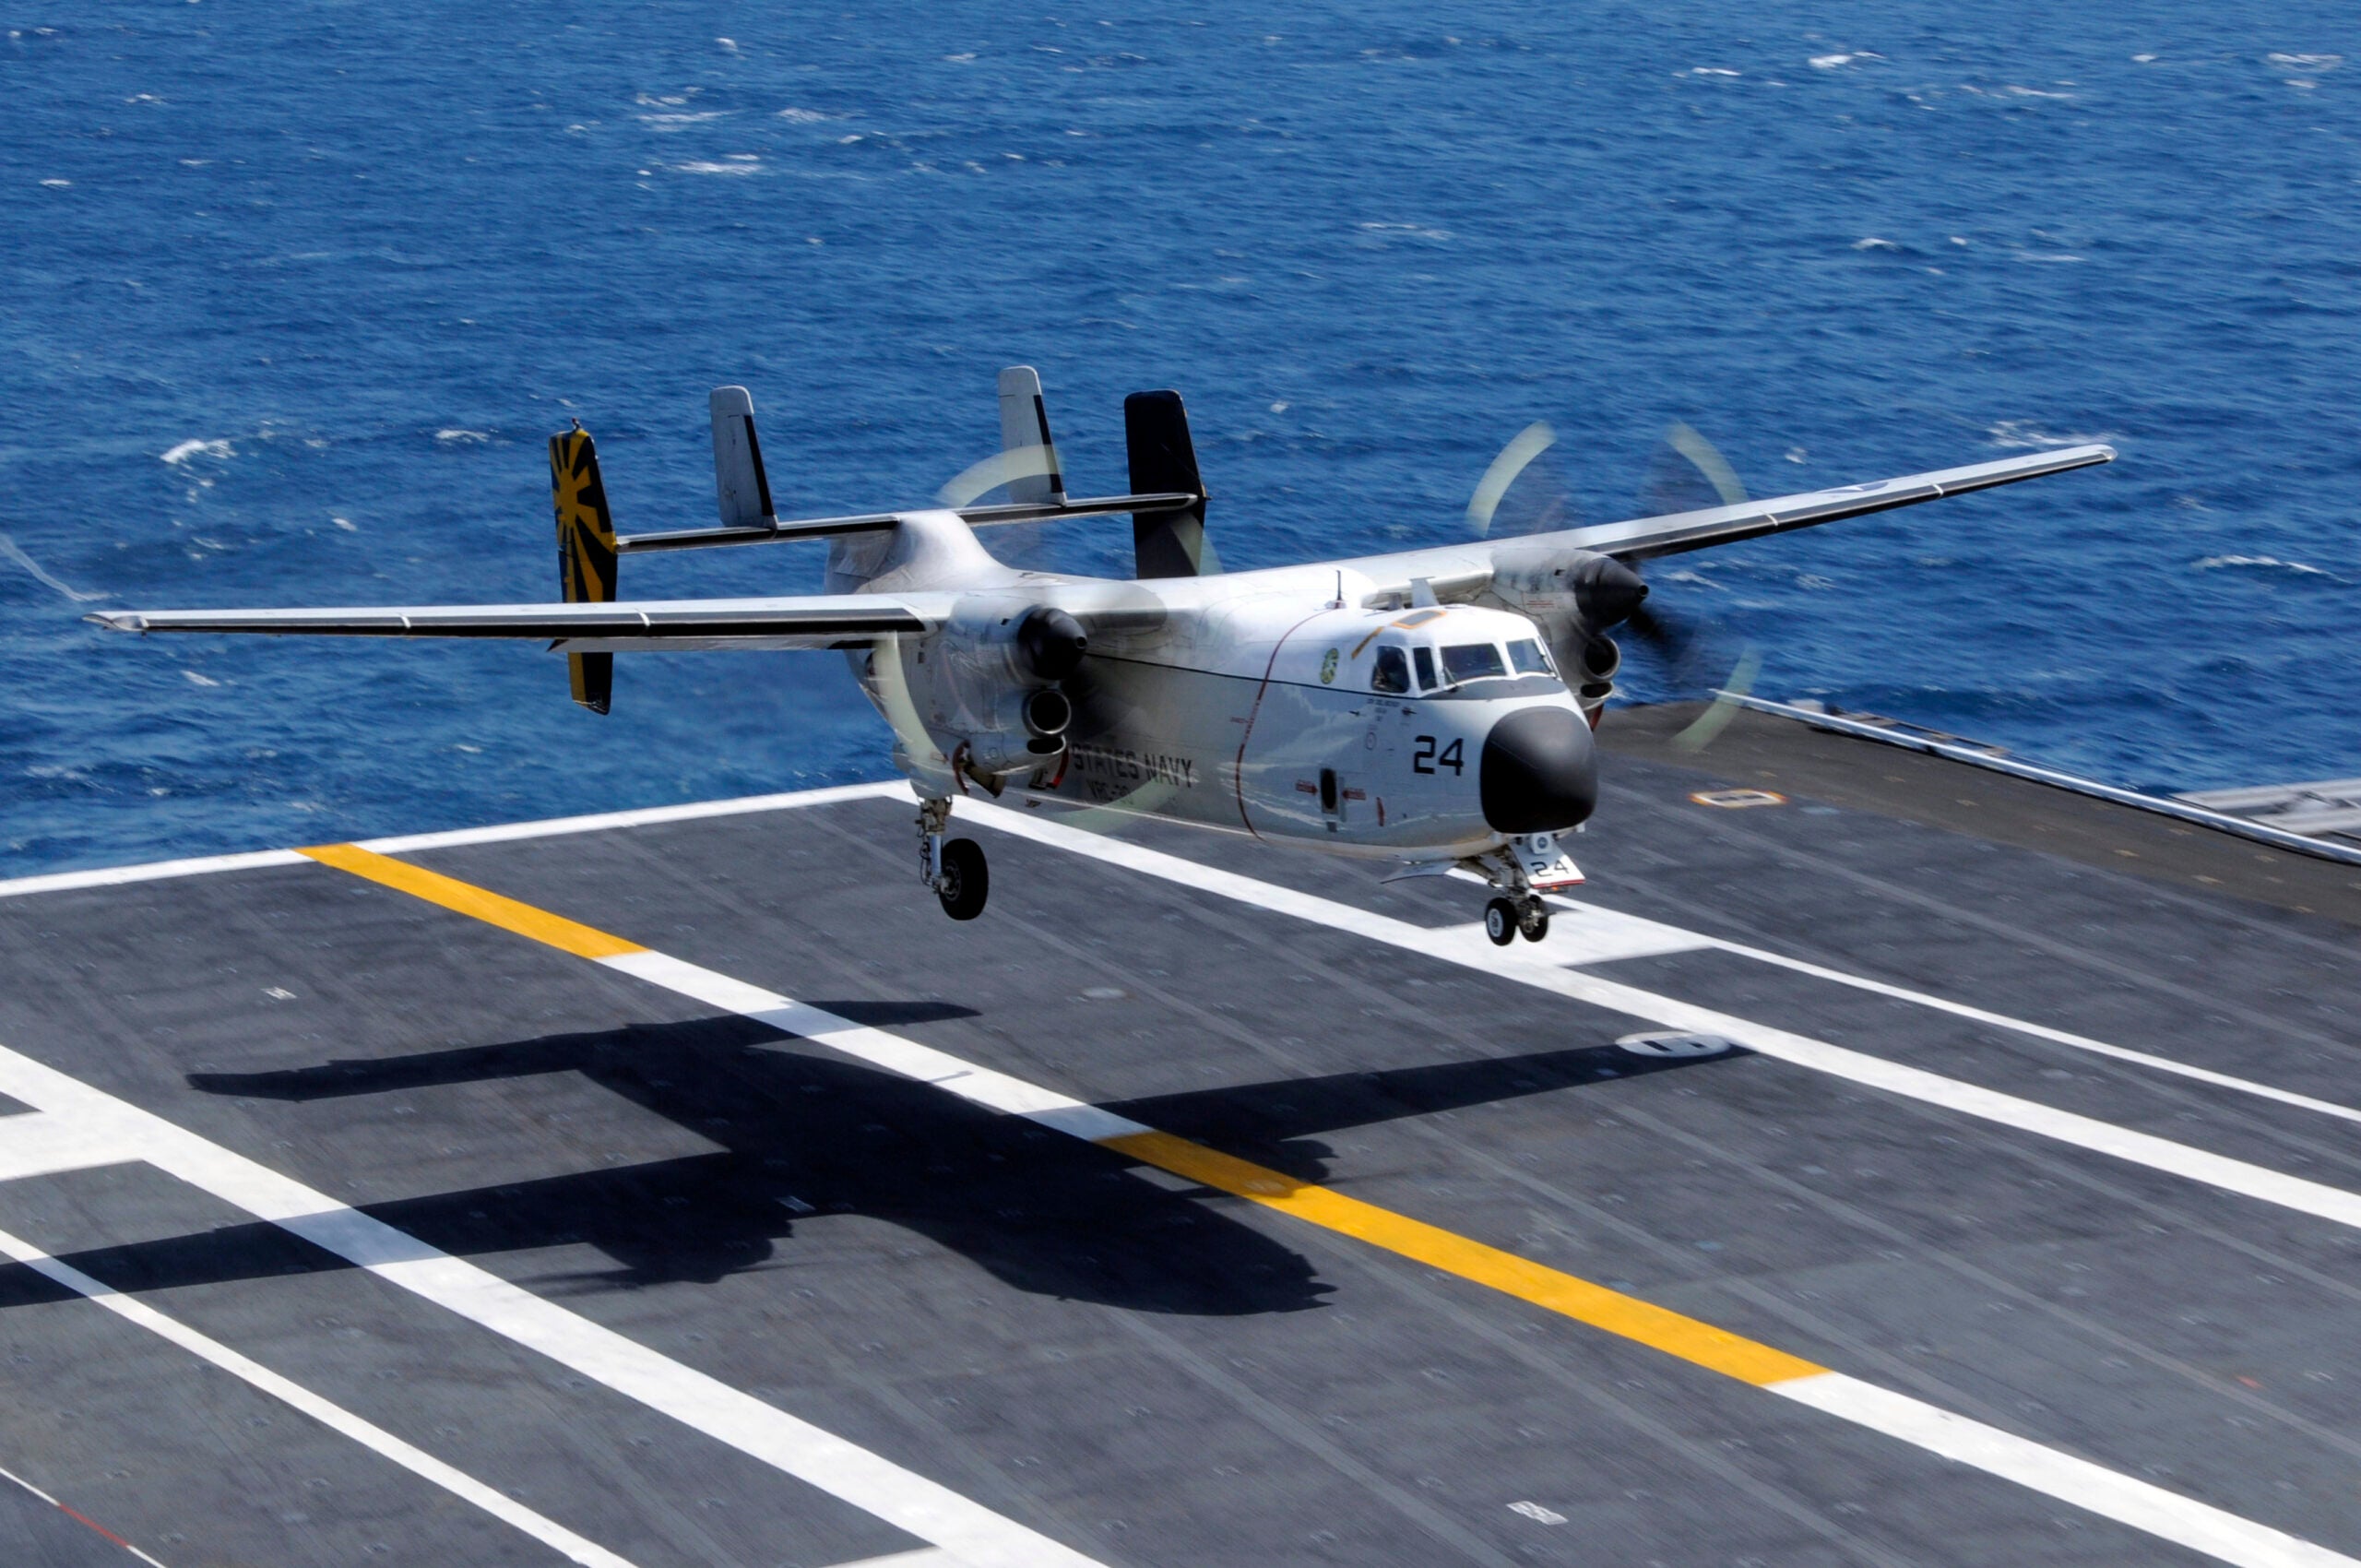 PACIFIC OCEAN (July 12, 2020) A C-2A Greyhound assigned to the Providers of Fleet Logistics Support Squadron 30 lands aboard the aircraft carrier USS Nimitz. (U.S. Navy photo by Mass Communication Specialist 3rd Class Peter Merrill)